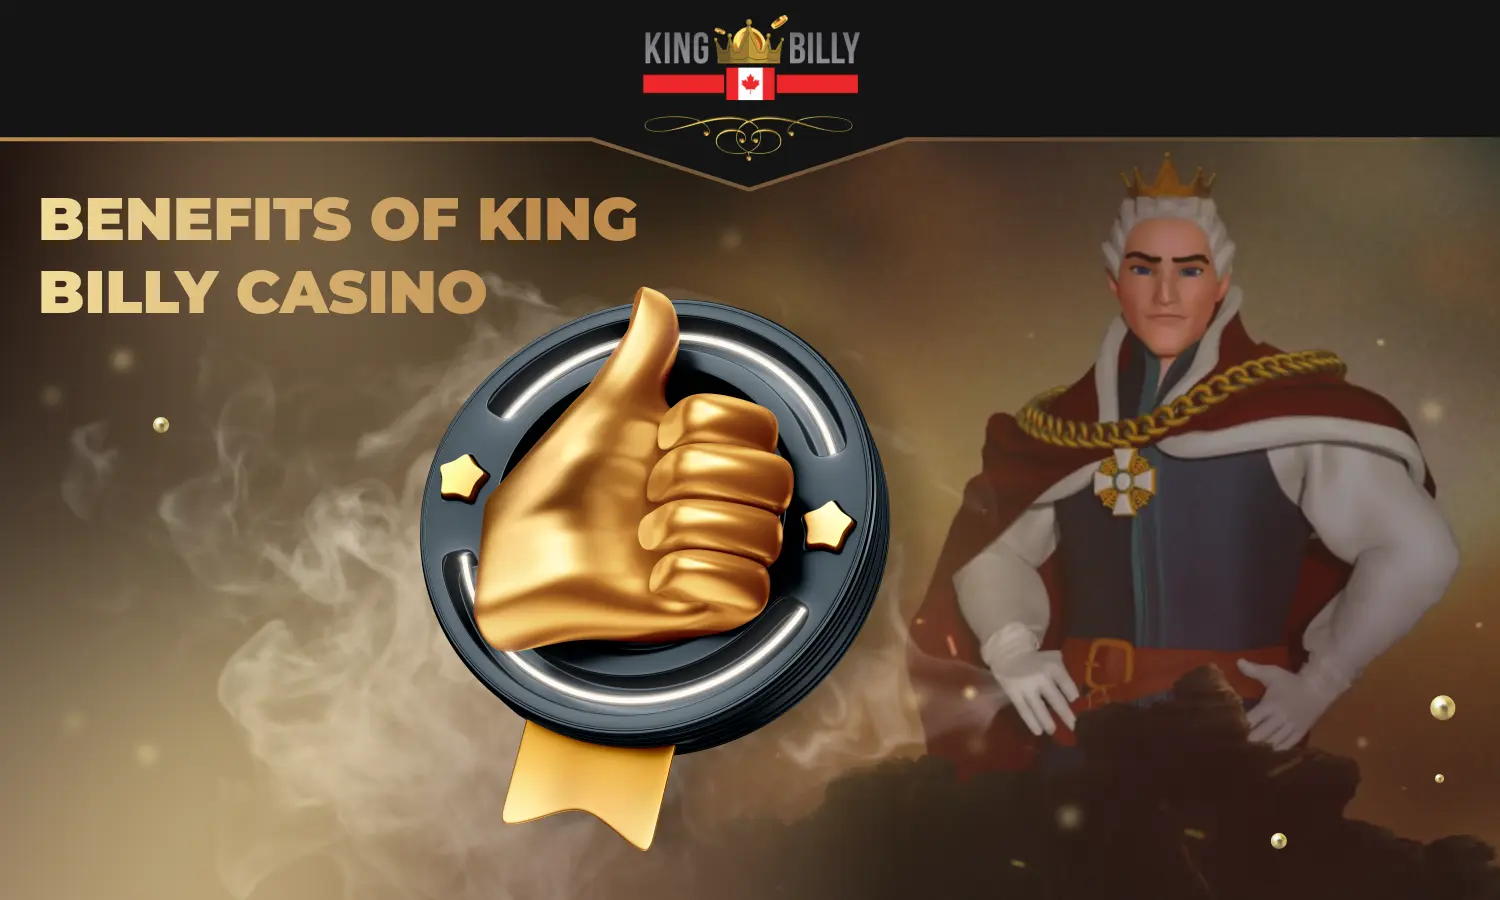 King Billy Casino has a number of benefits for Canadian users